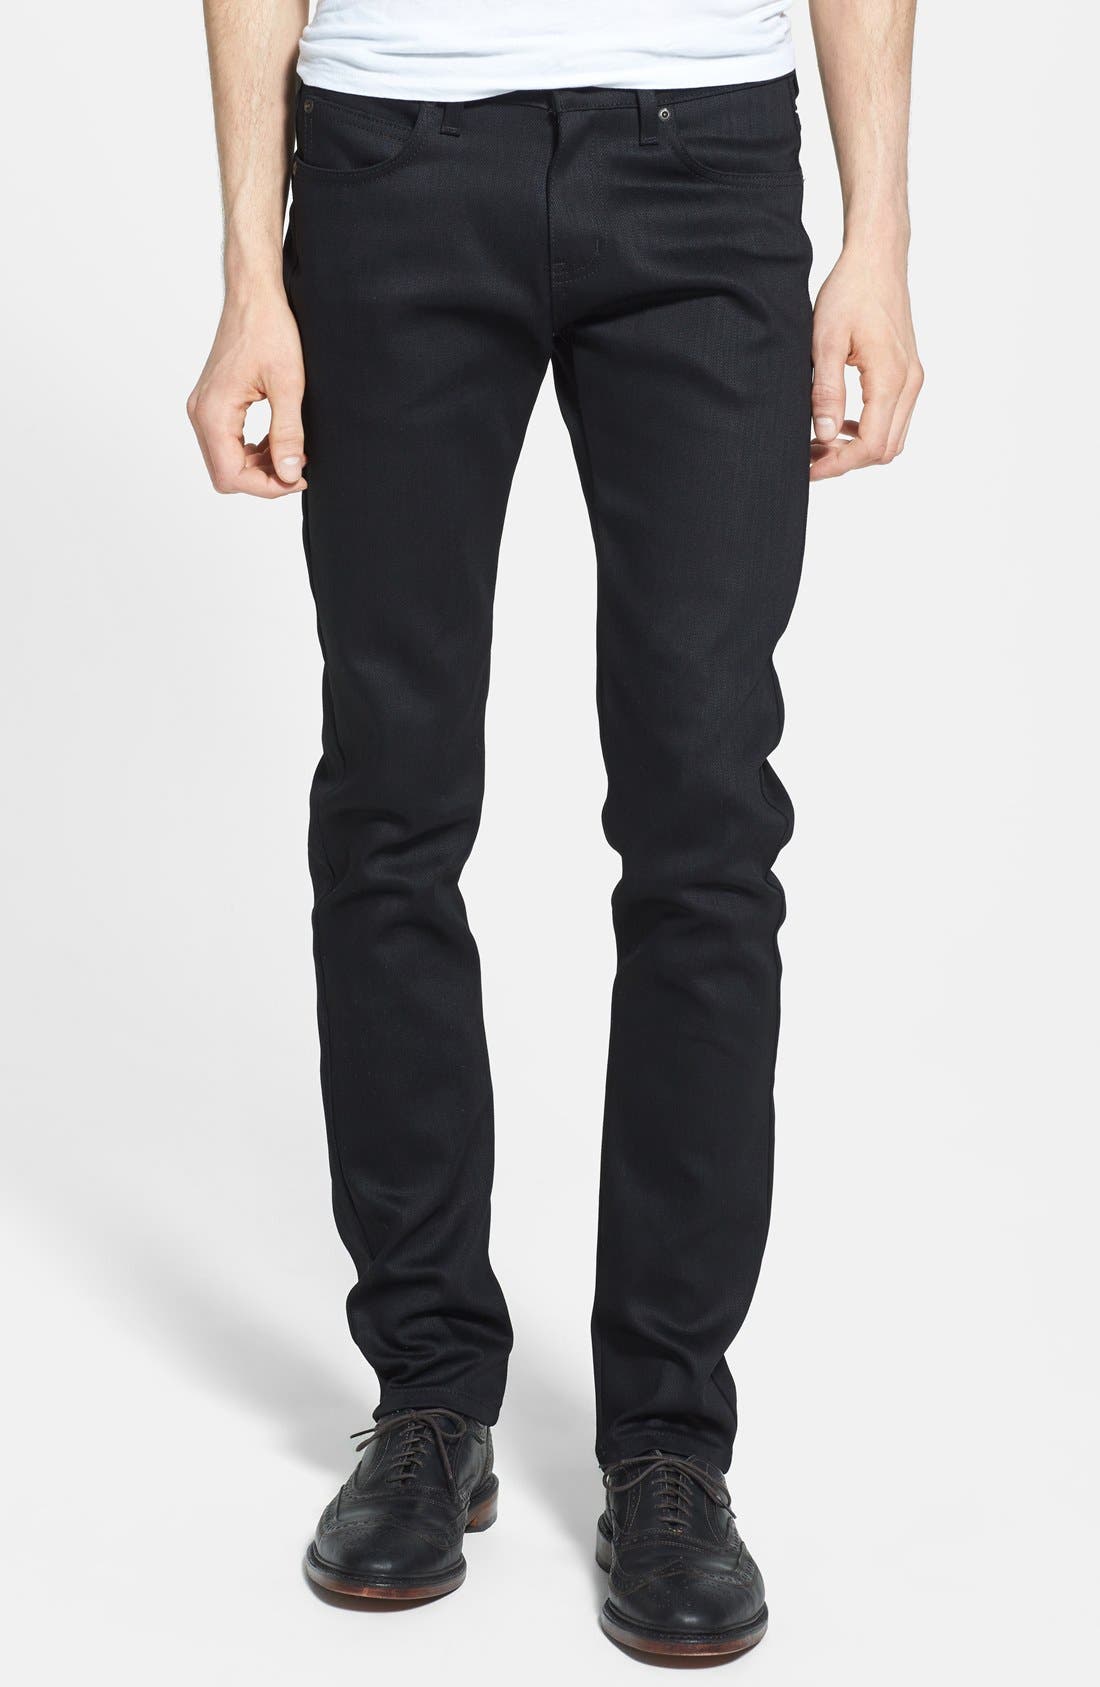 naked and famous black jeans